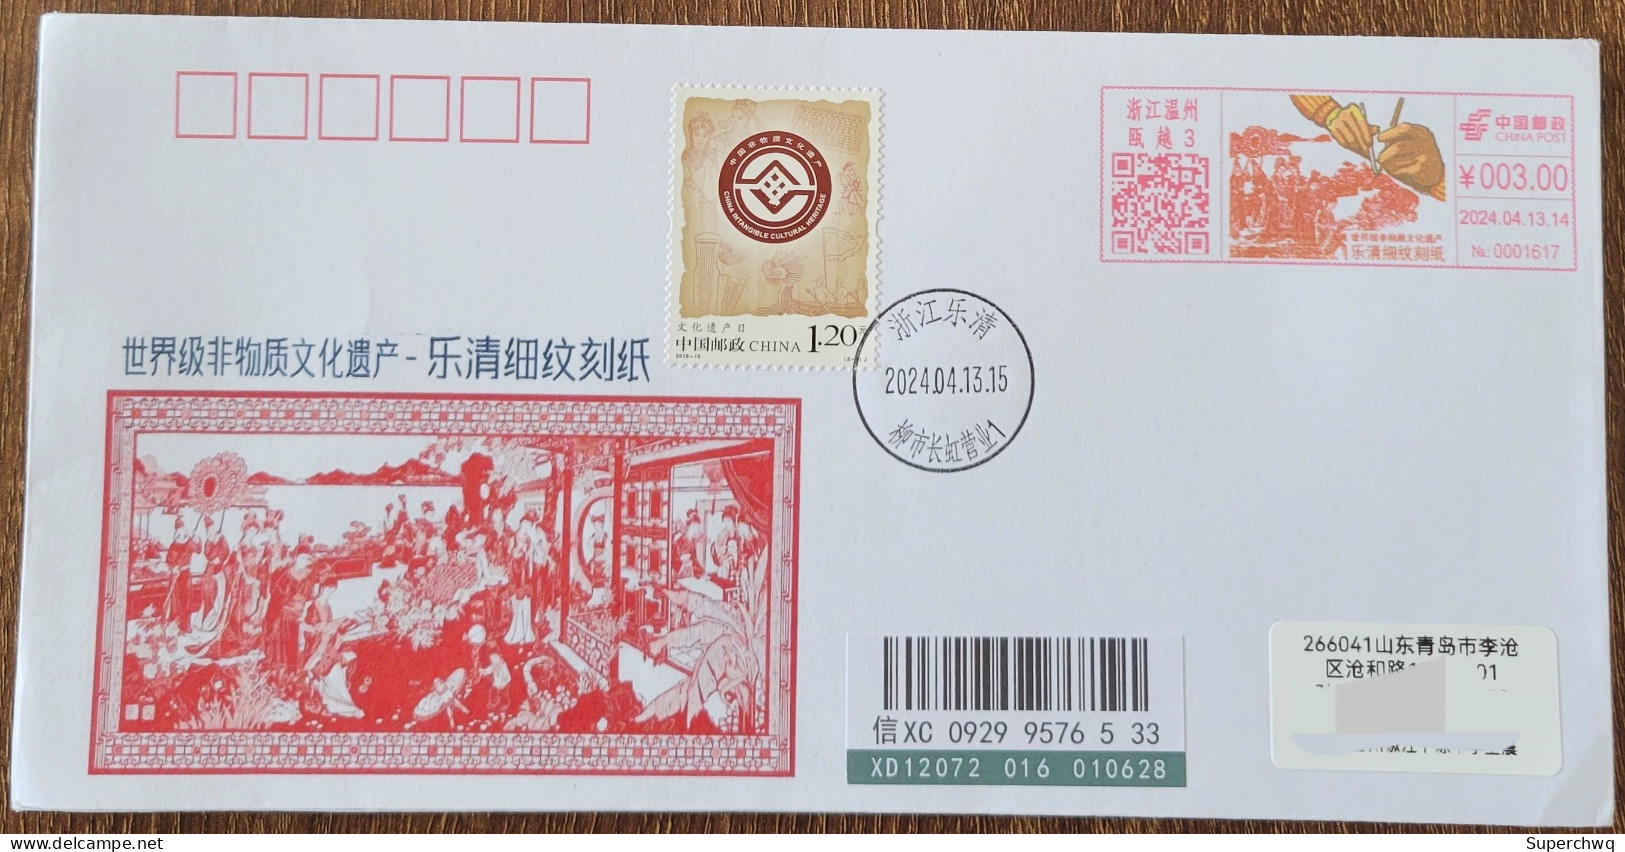 China Cover "Leqing Fine Grain Engraving Paper" (Wenzhou) Colorful Postage Machine Stamp With The Same Theme, Plus First - Covers